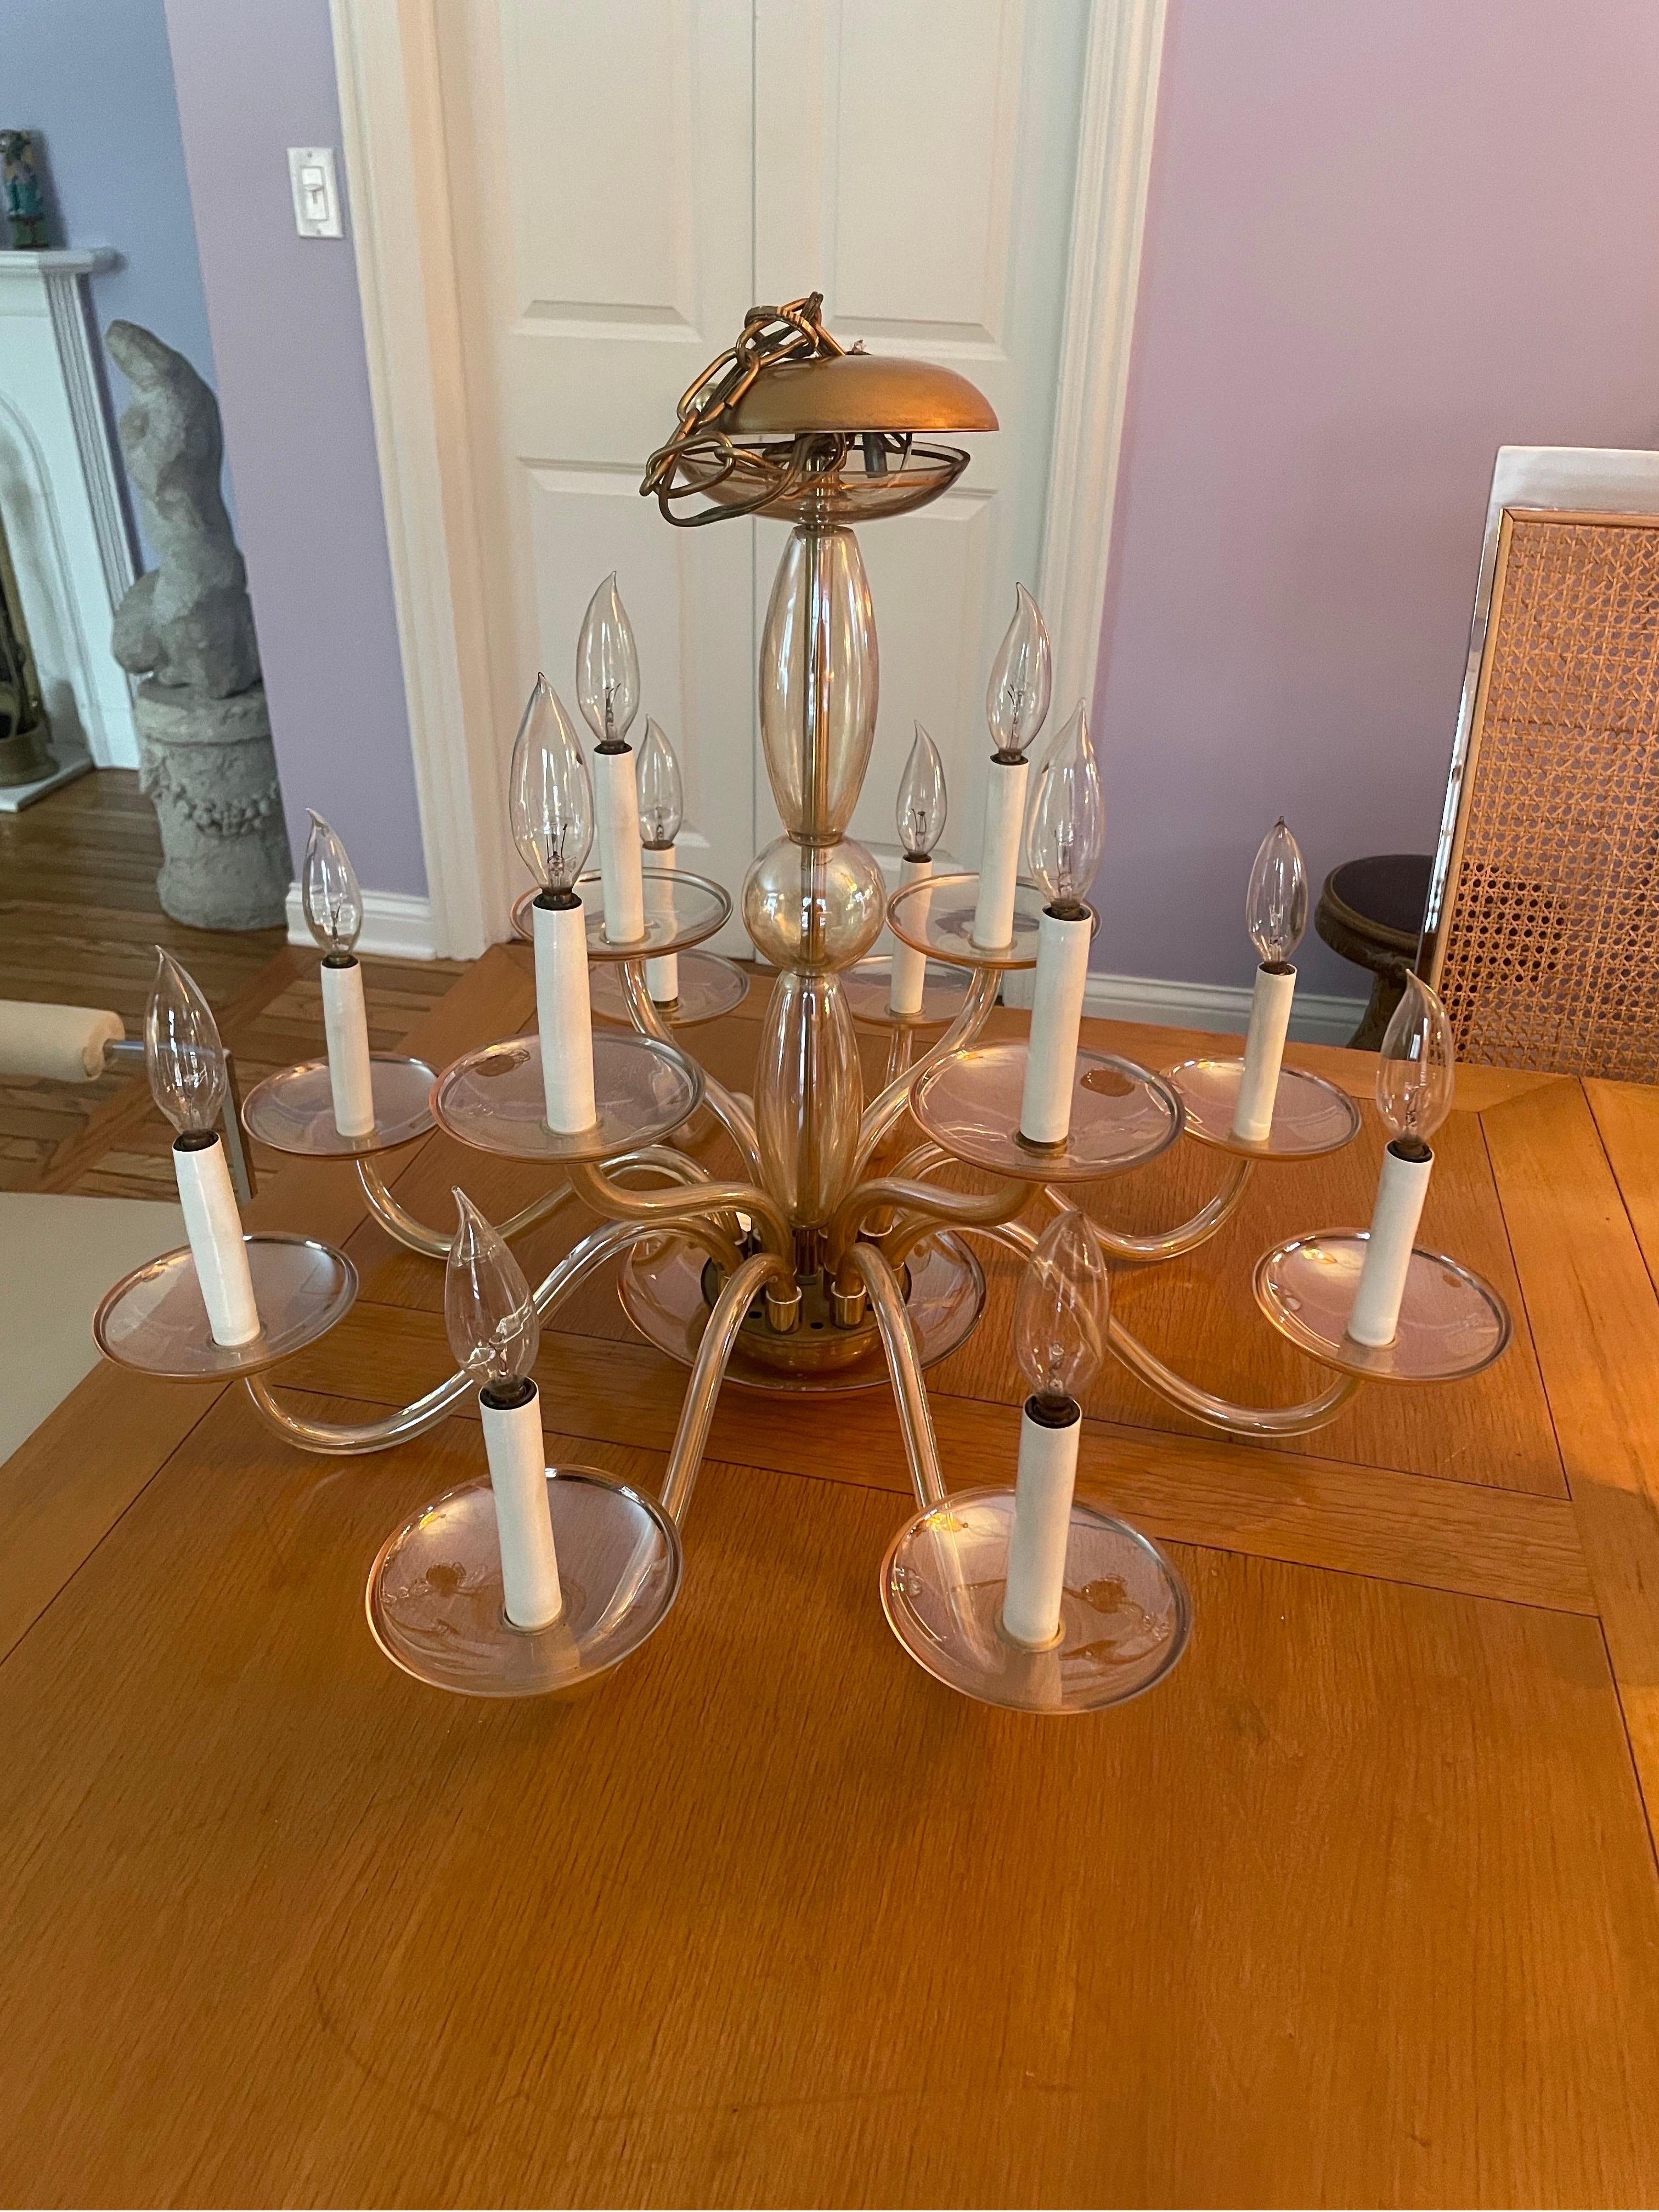 This is a beautiful vintage Murano
Glass 12 arm chandelier. The glass has a slight iridescent gold hue to the glass.  It’s in wonderful vintage condition, no chips or cracks to glass 